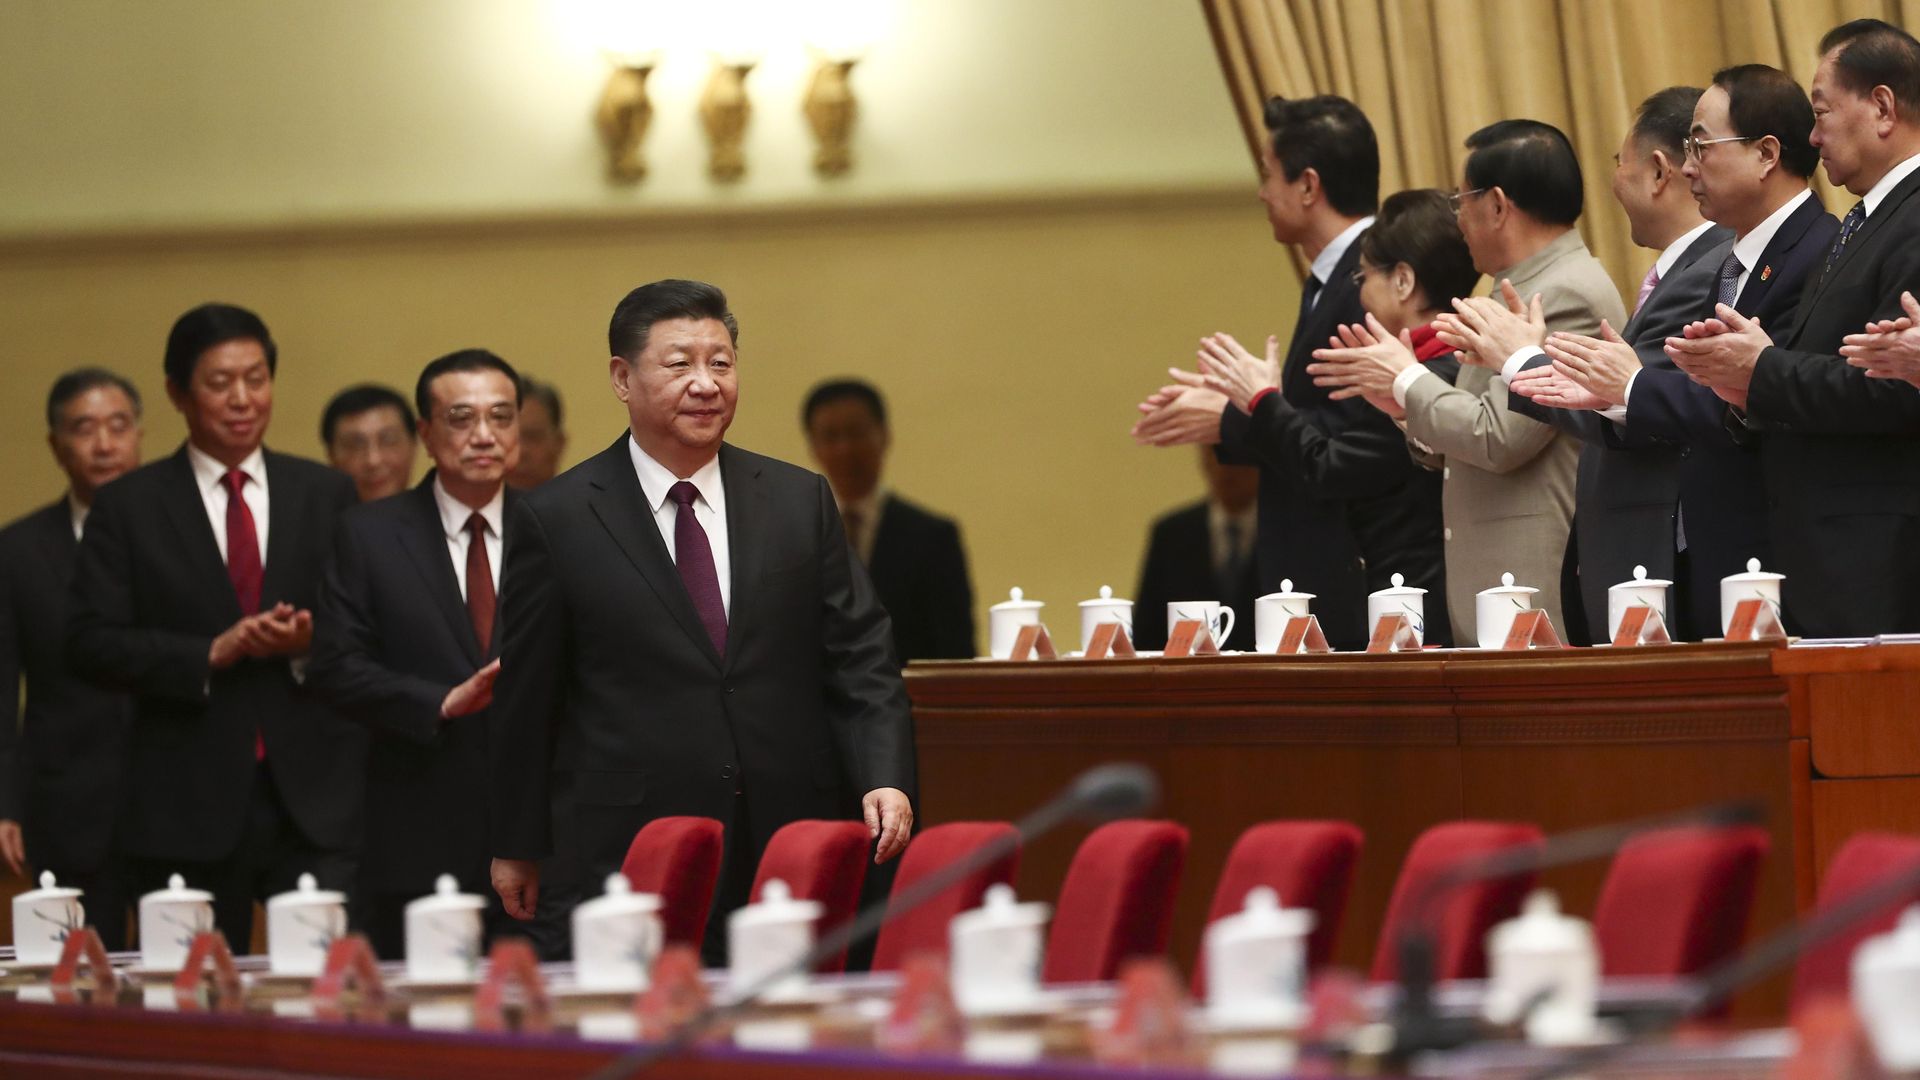 Chinese President Xi Jinping walking through his party headquarters with people clapping